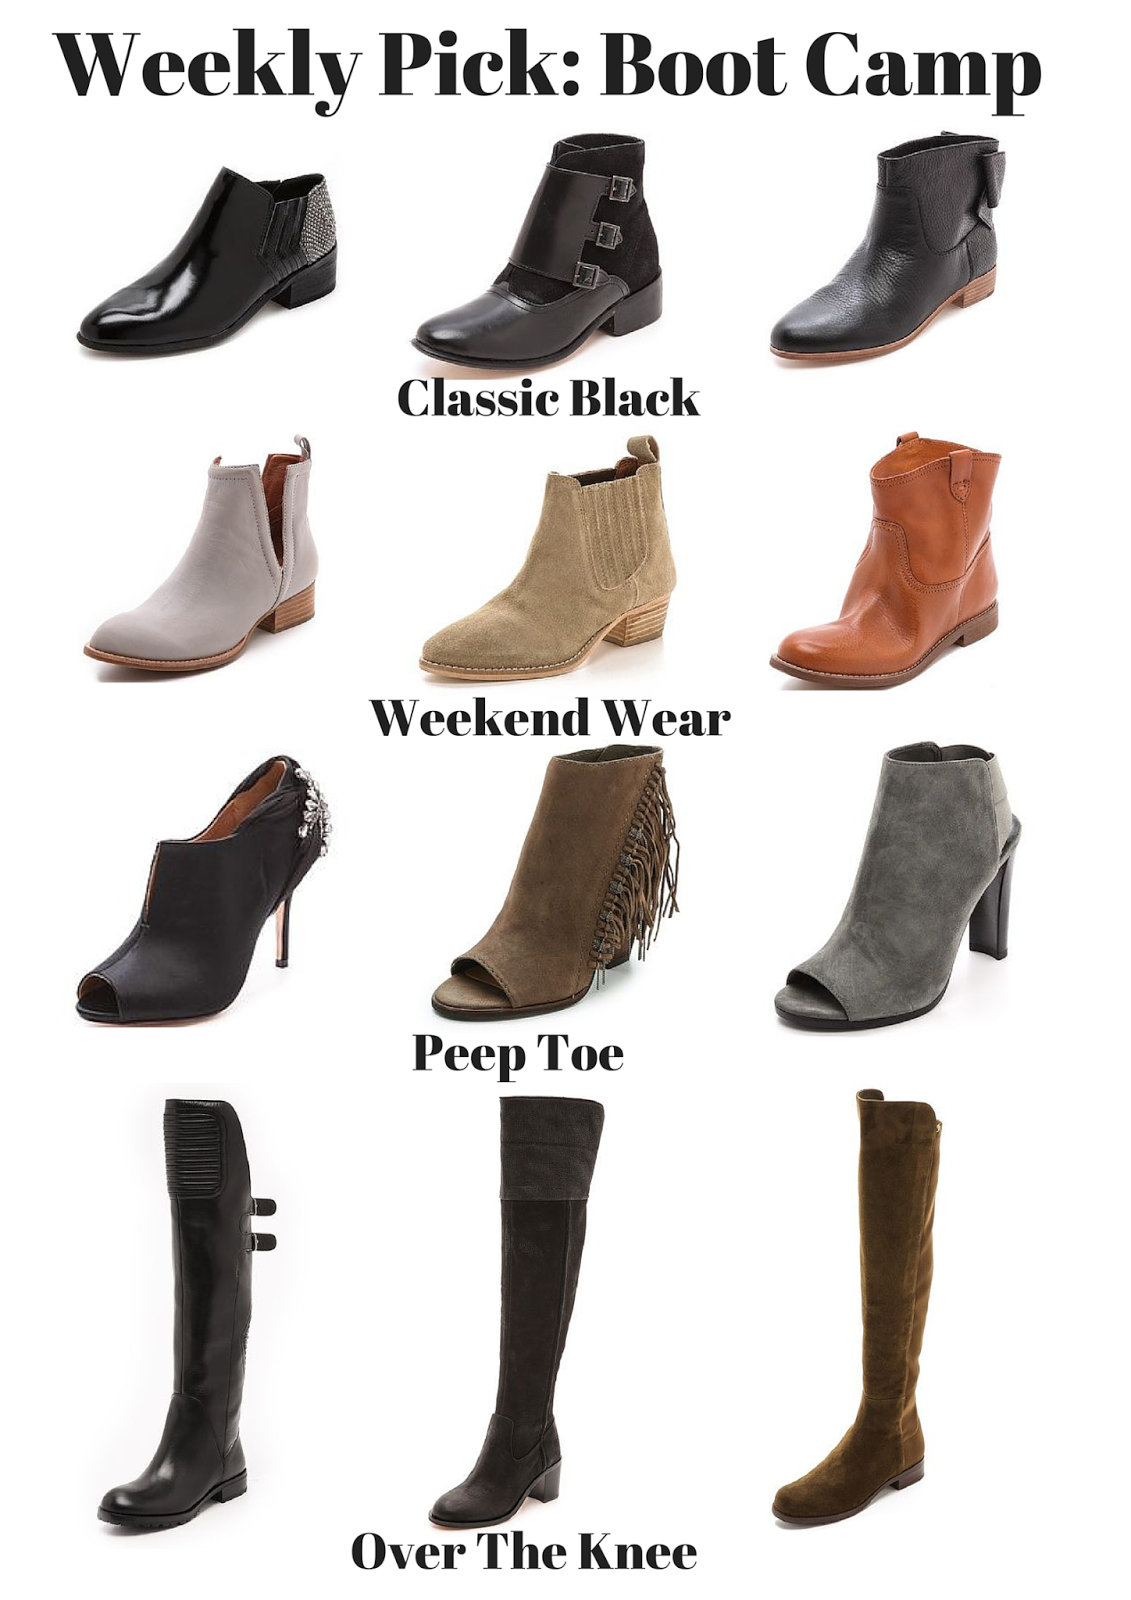 Project Soiree: Weekly Pick: Boot Camp